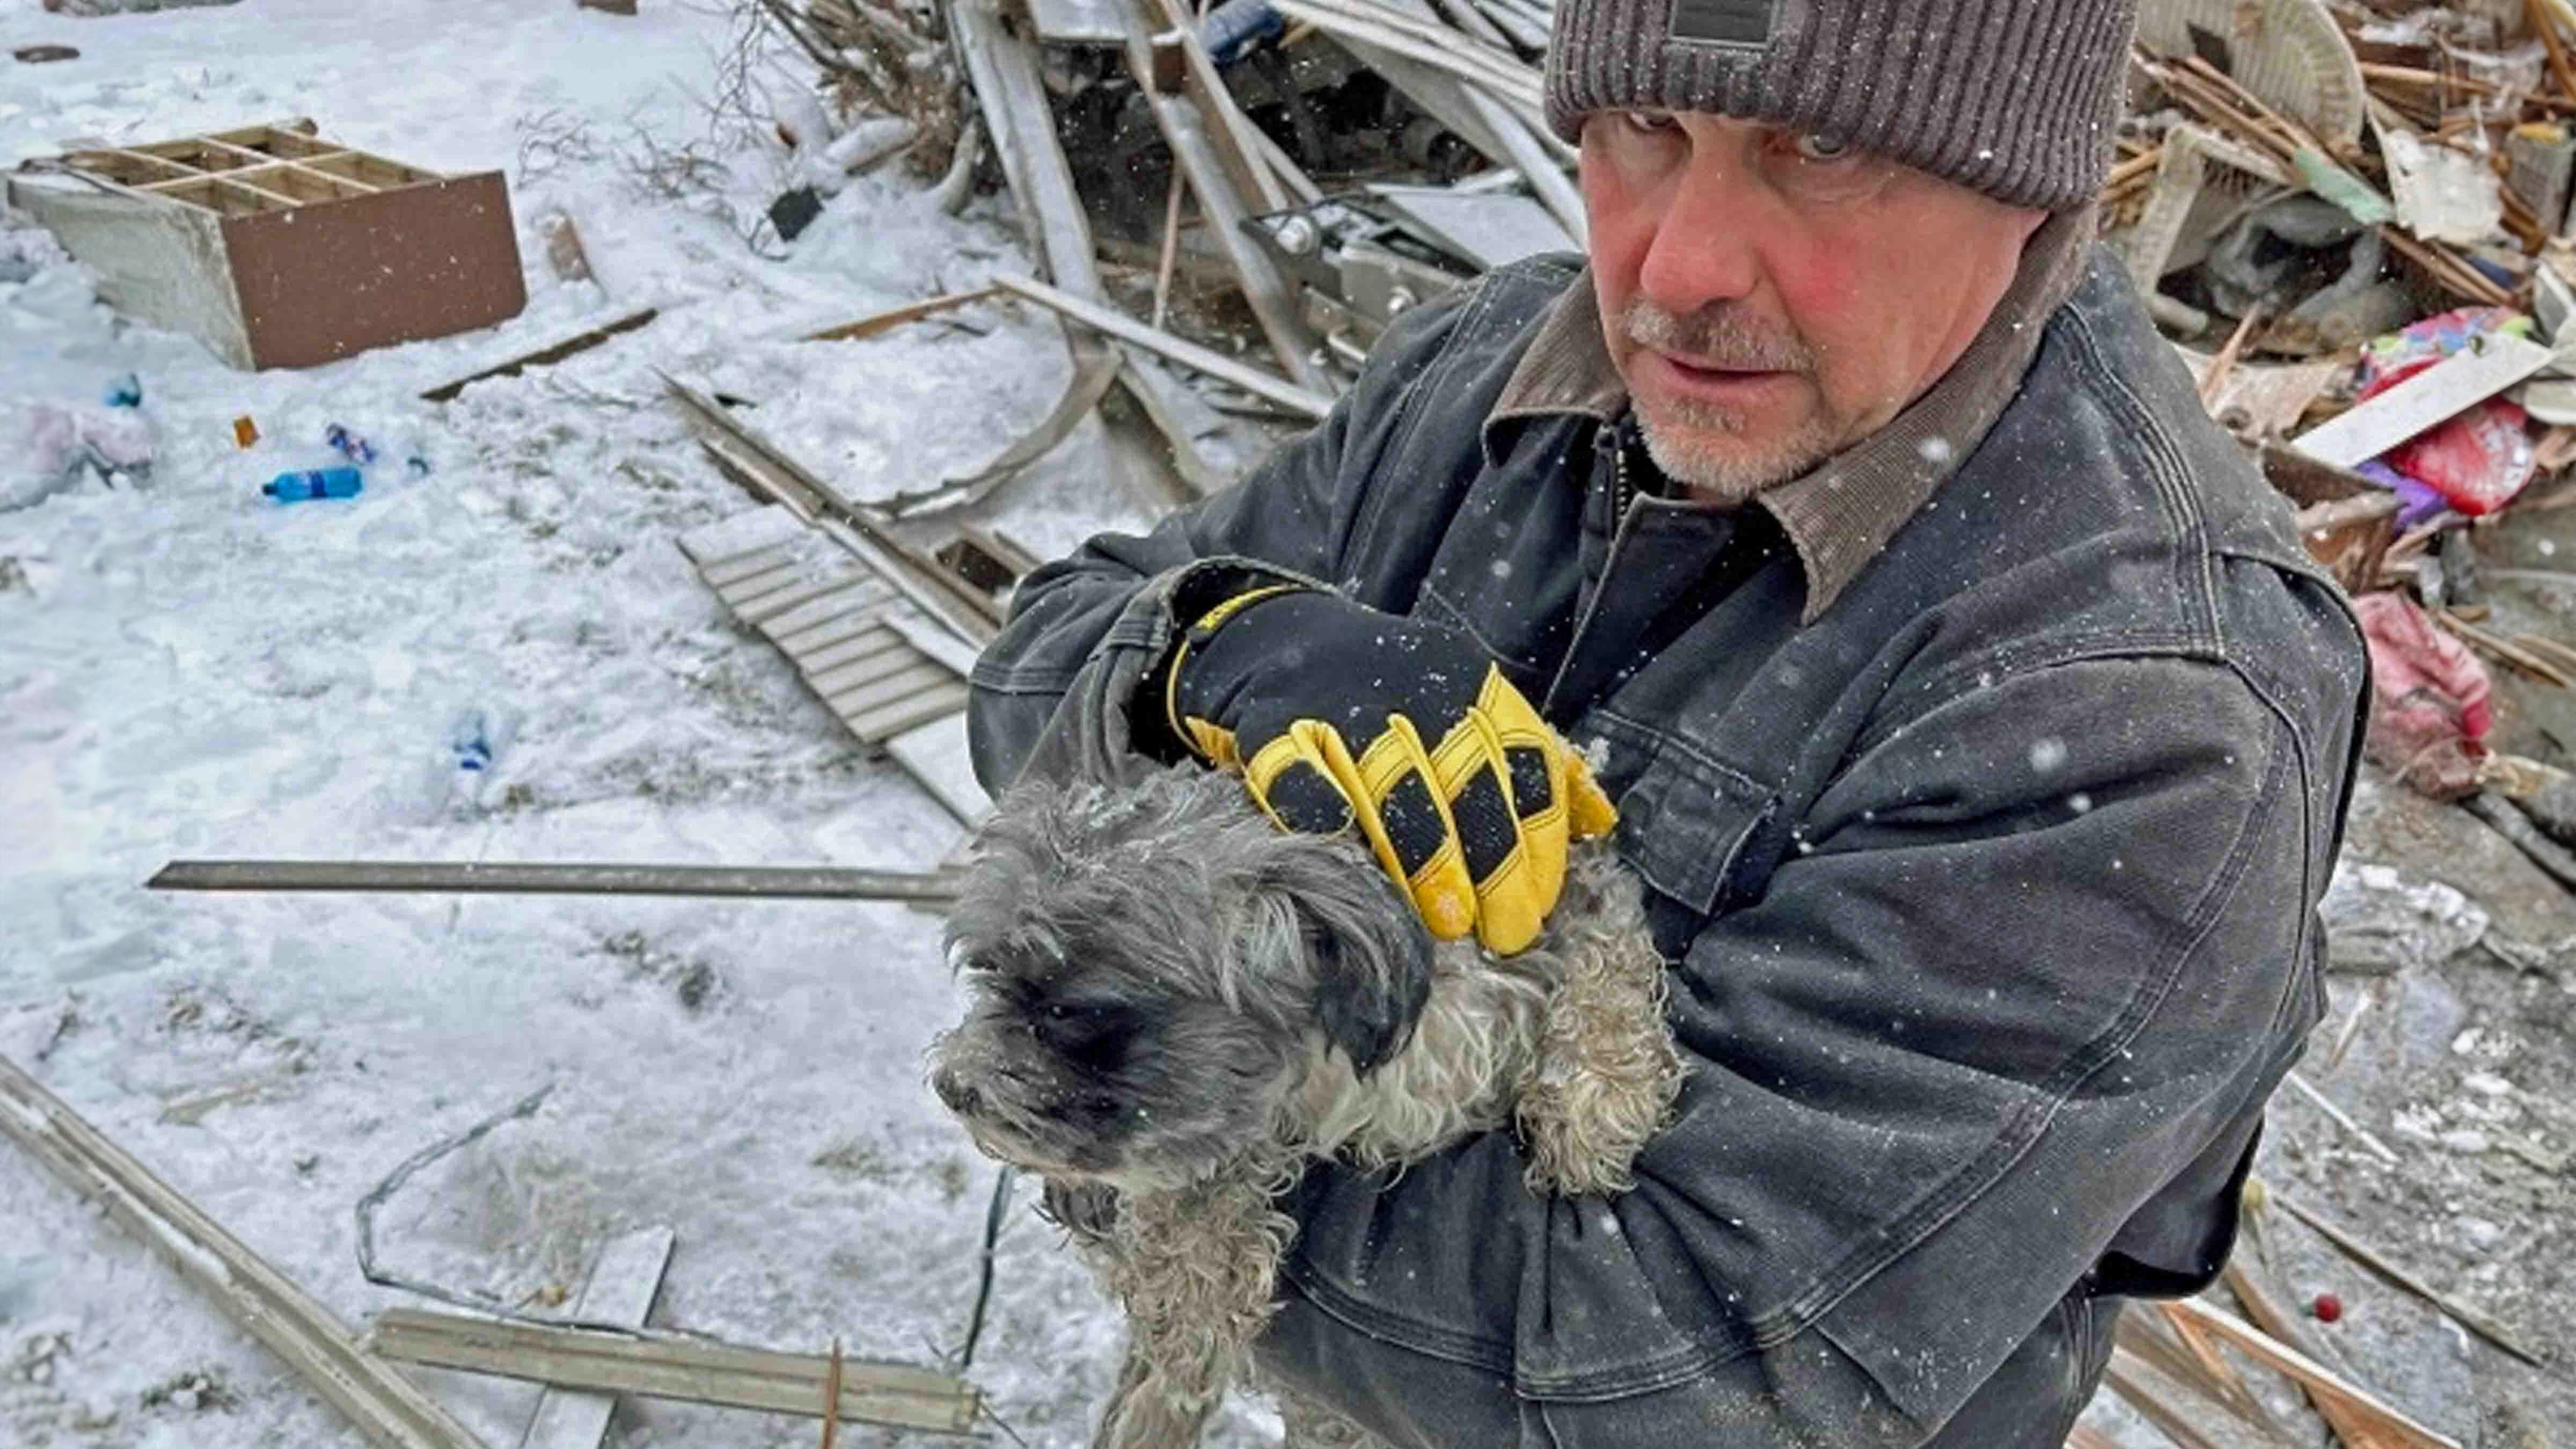 Willy was one of three pets that were in a house that was destroyed during a 30-hour standoff in Sheridan over the course of two days. Another dog also has been found, but a cat is still missing.